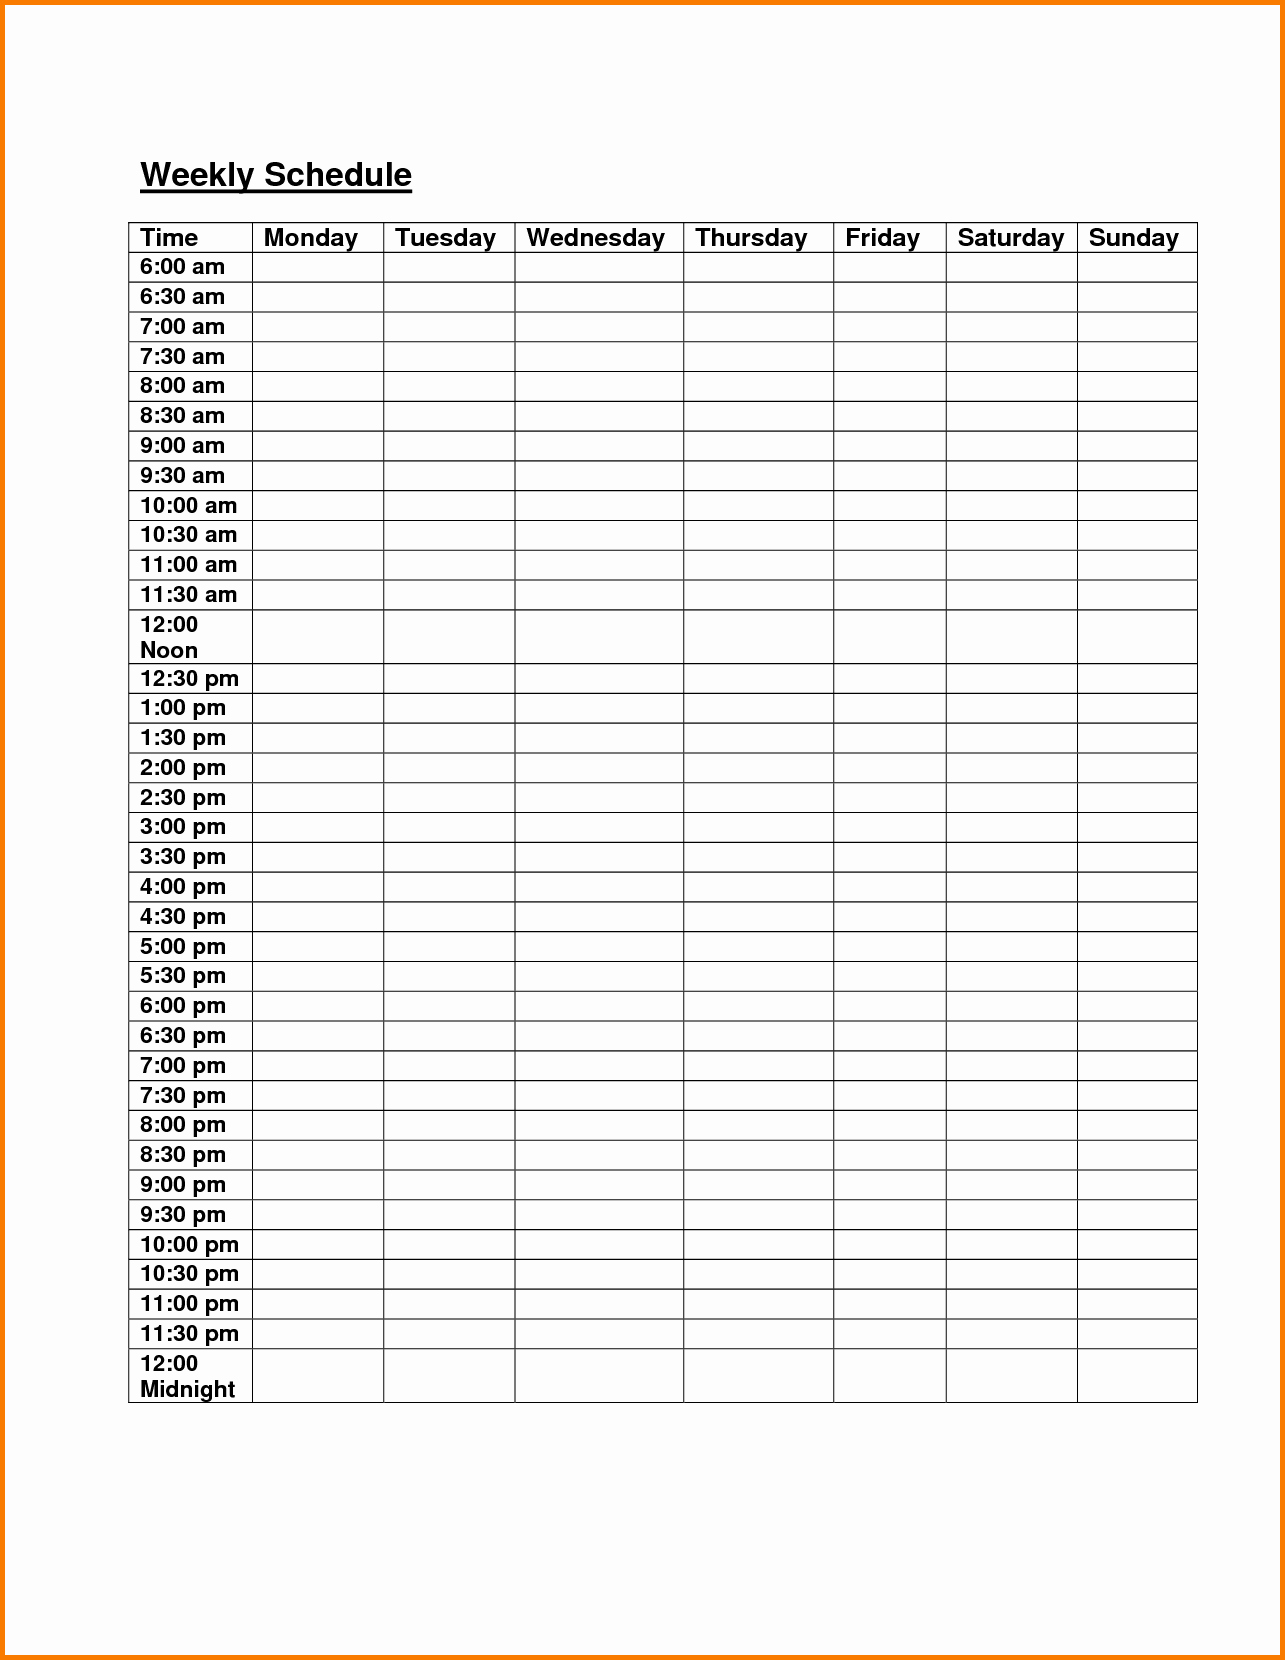 Weekly Schedule Template Pdf Inspirational Weekly Class Schedule Template